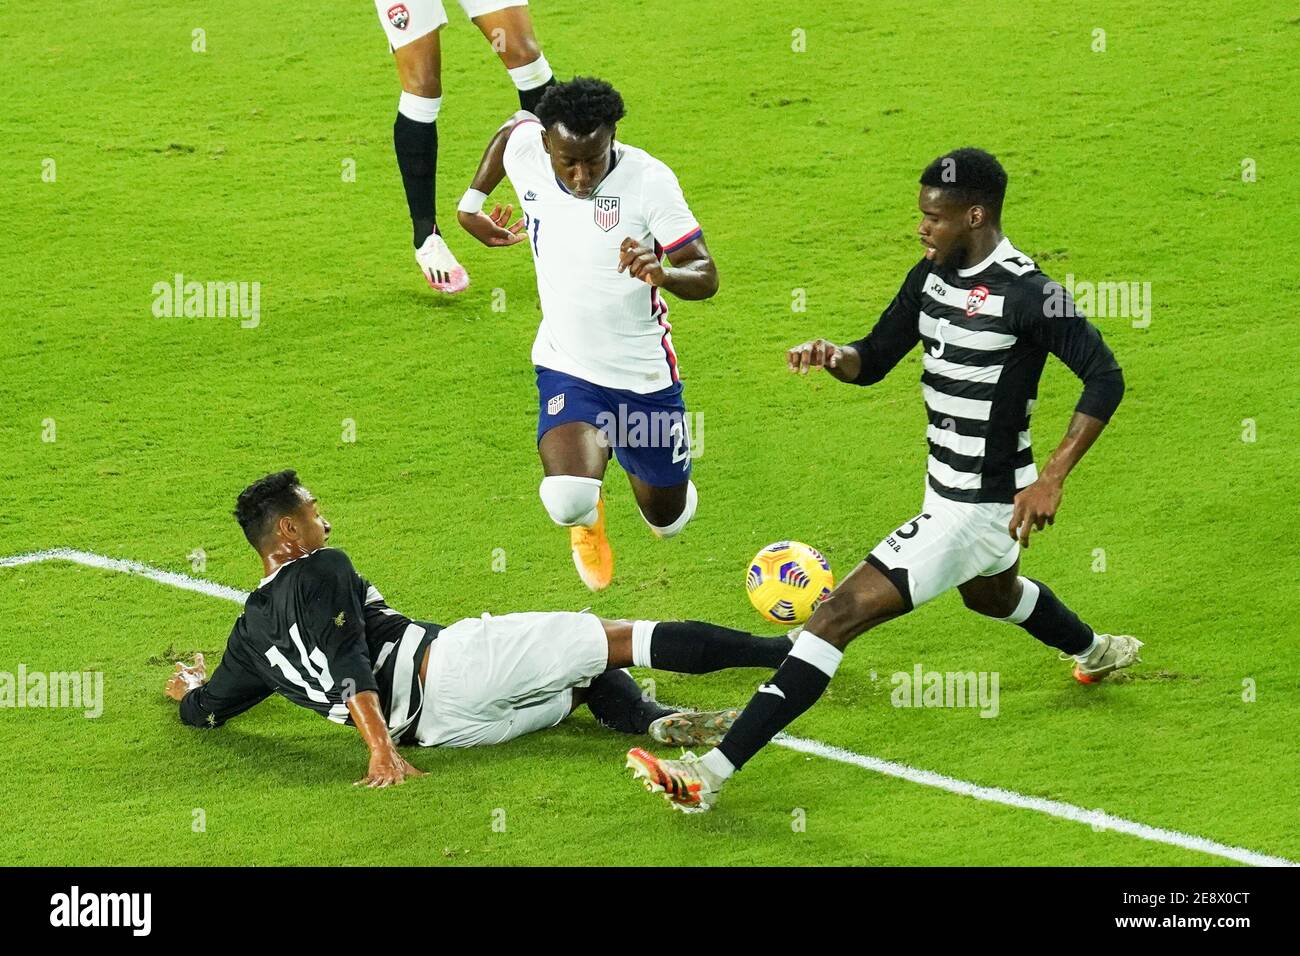 Orlando, Florida, USA, January 31, 2021, Trinidad and Tobago defender Alvin Jones #16 makes a slide tackle during an International Friendly Match against USA.  (Photo Credit:  Marty Jean-Louis) Stock Photo